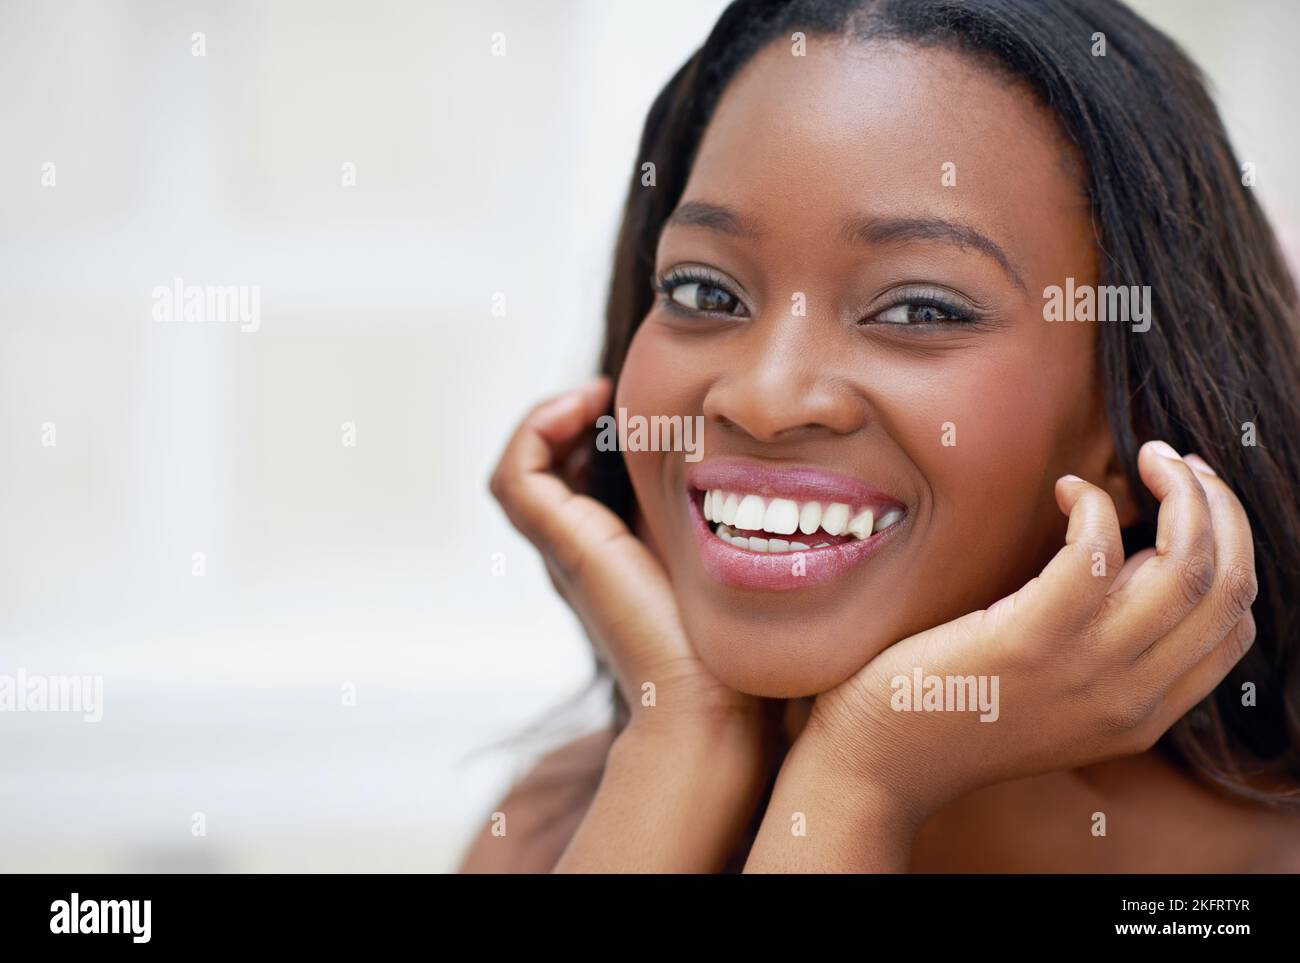 Flawless and radiant. A young woman during her daily beauty ritual. Stock Photo